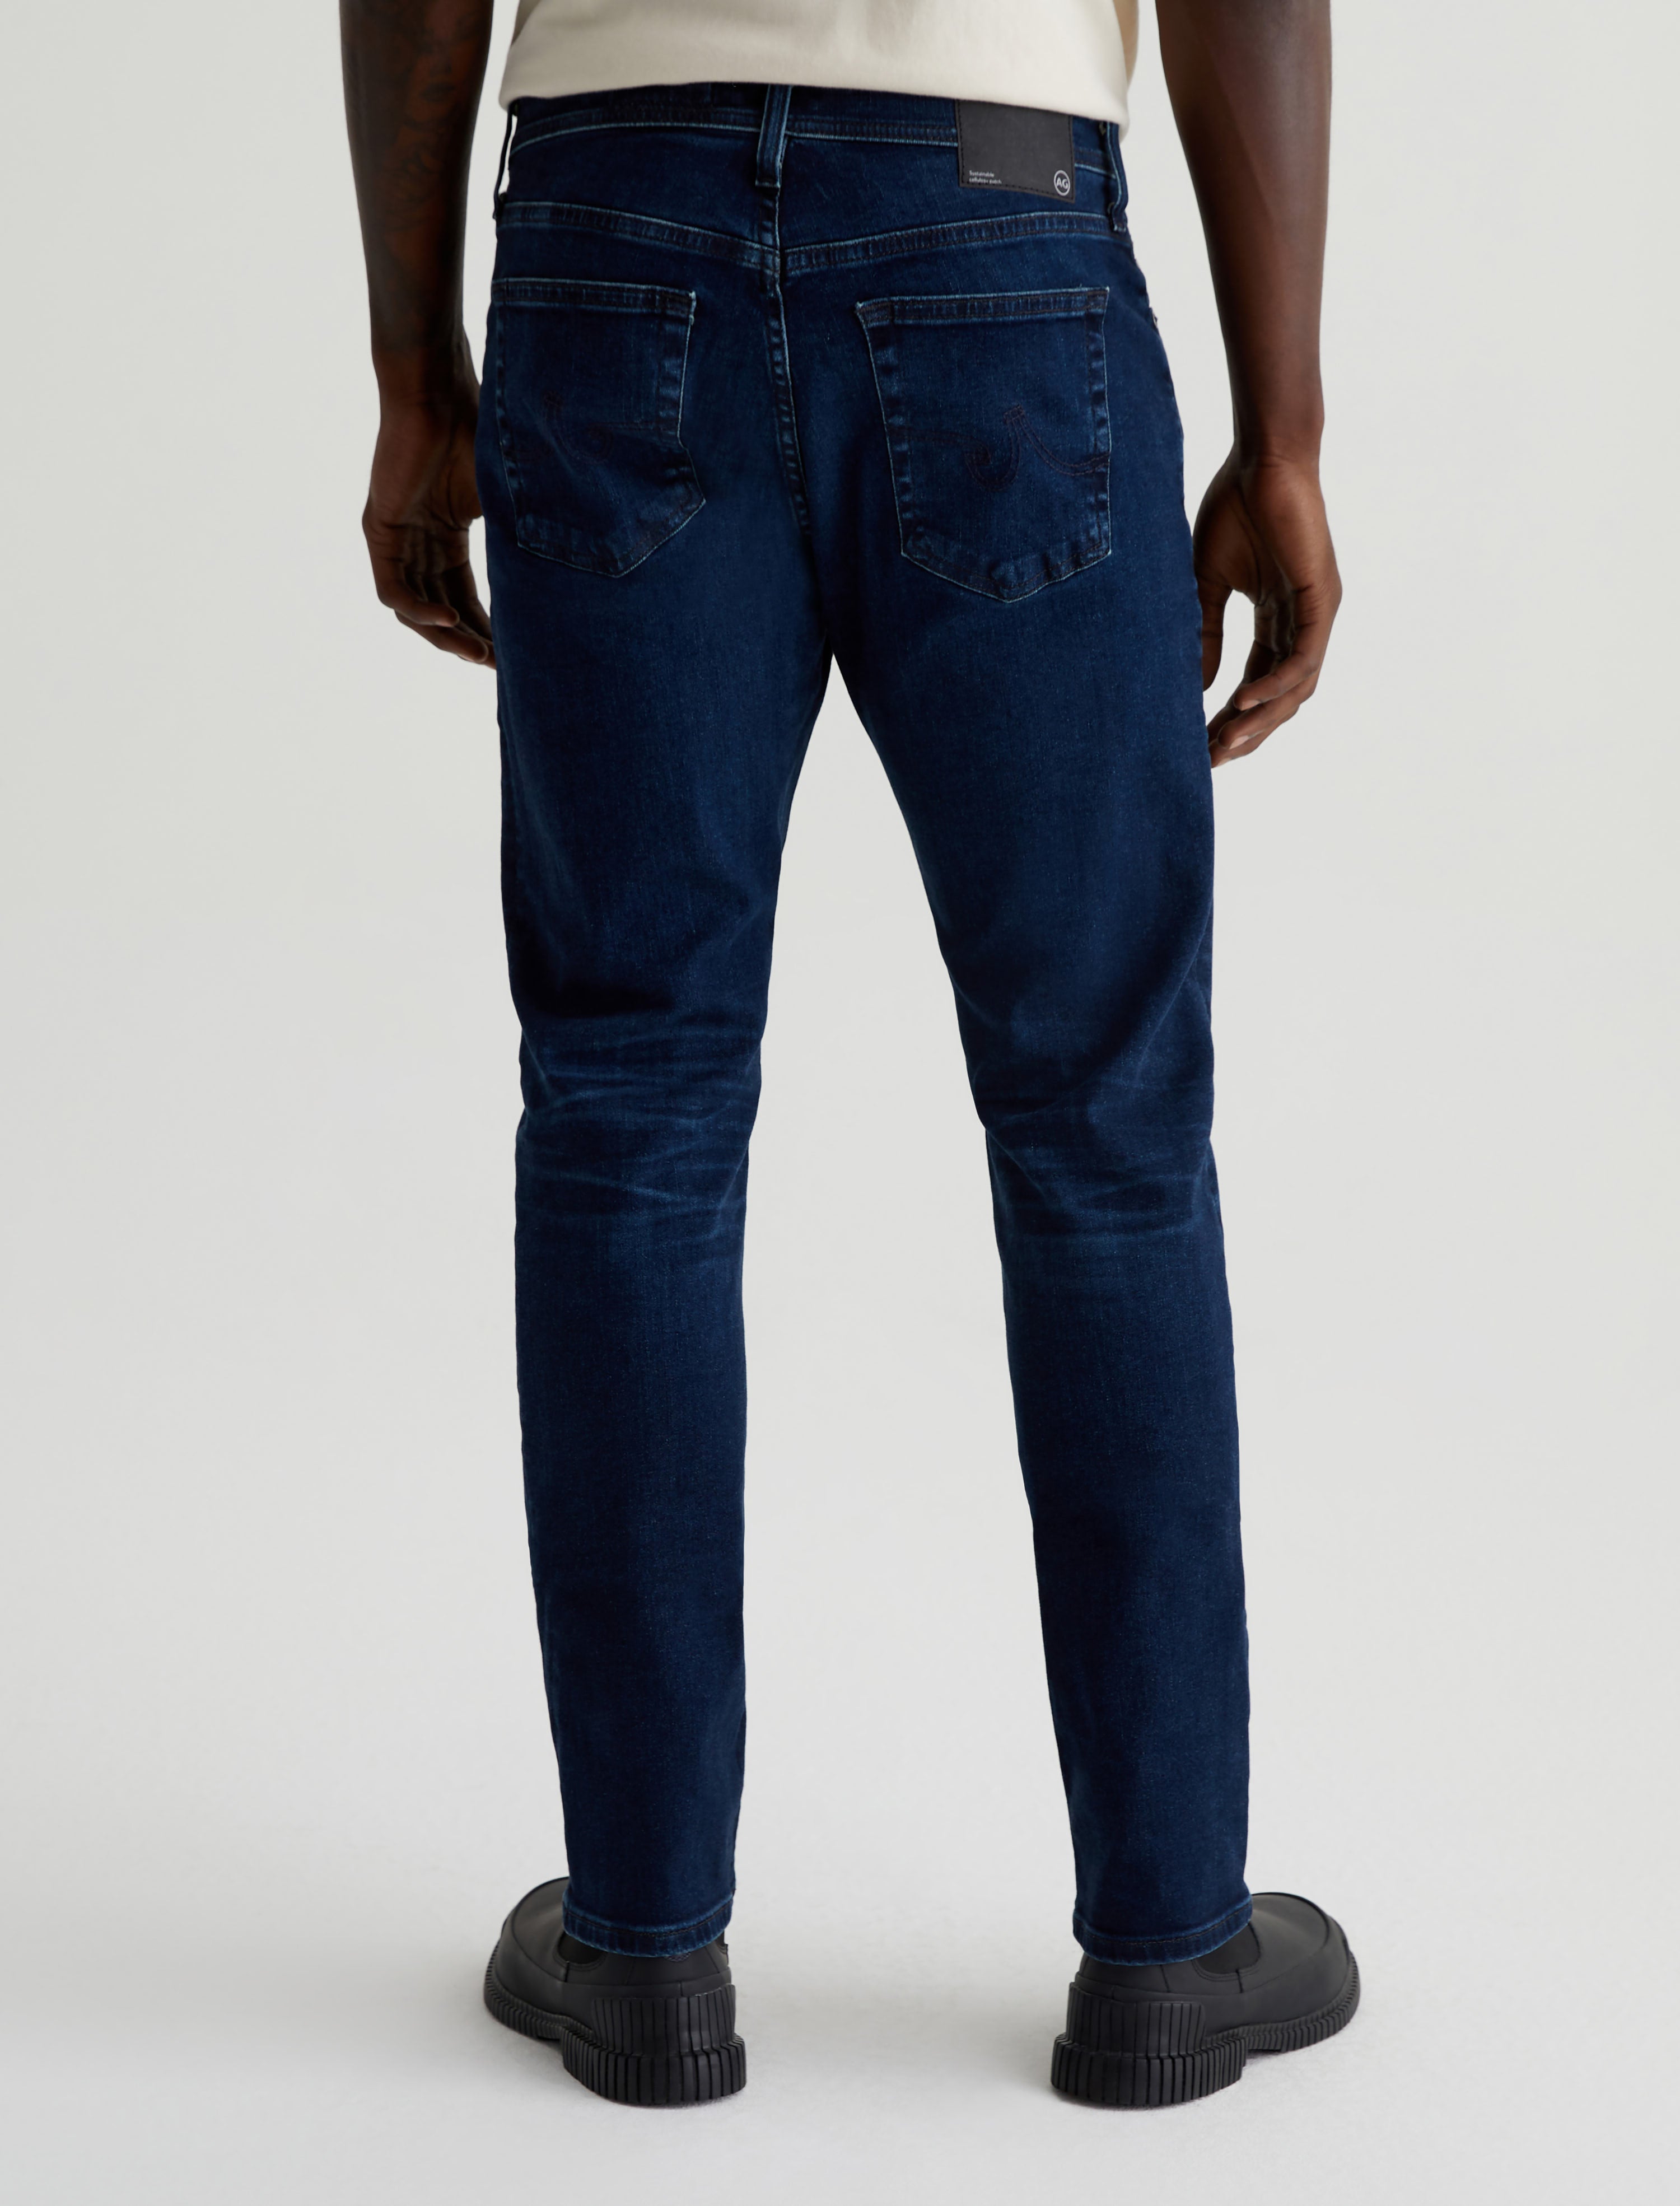 Mens Everett 3 Years Holzer at AG Jeans Official Store